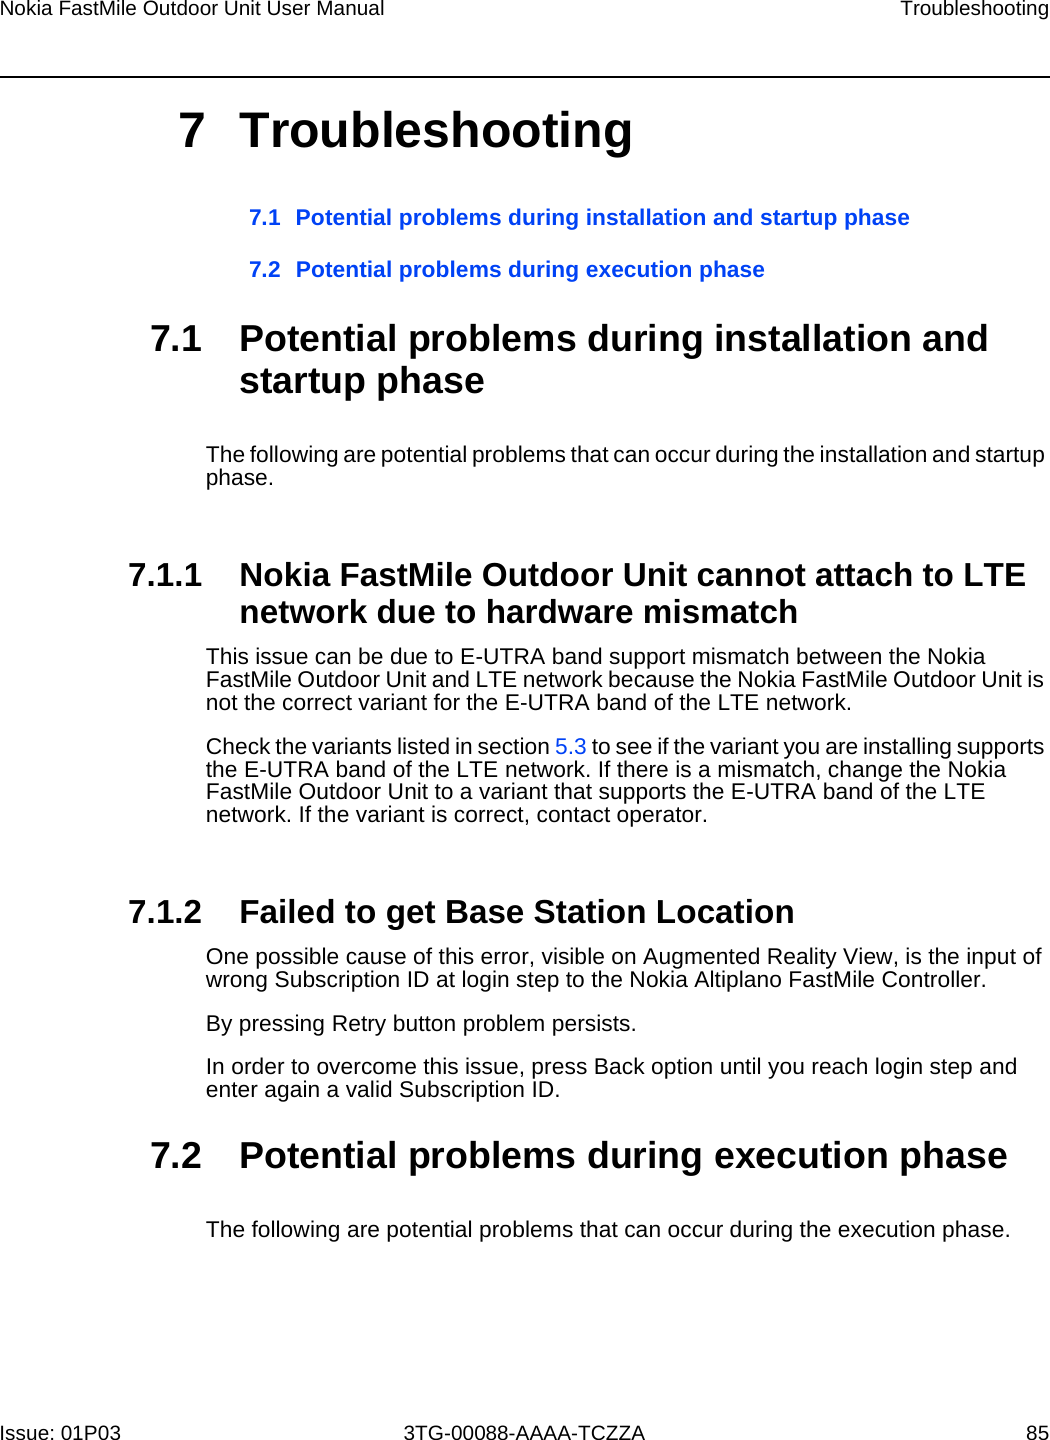 Page 80 of Nokia Bell 34003800FM20 FastMile Compact User Manual Nokia FastMile Outdoor Unit